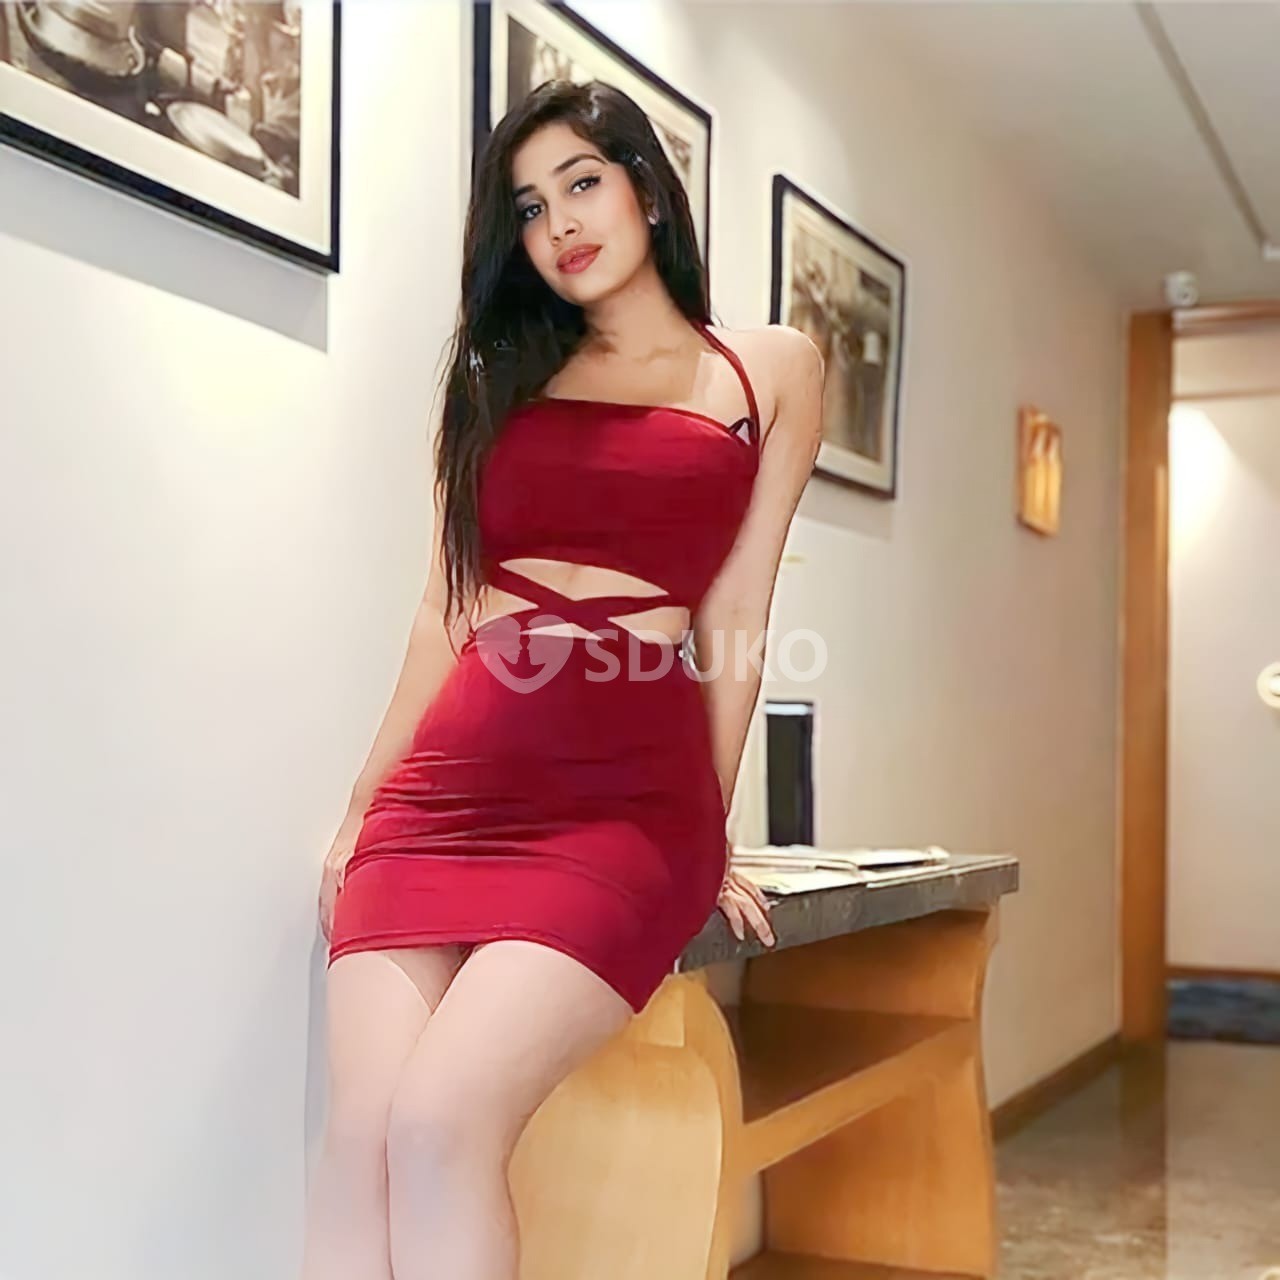 🌟BEST CALL GIRL INDEPENDENT ESCORT SERVICE IN LOW BUDGET